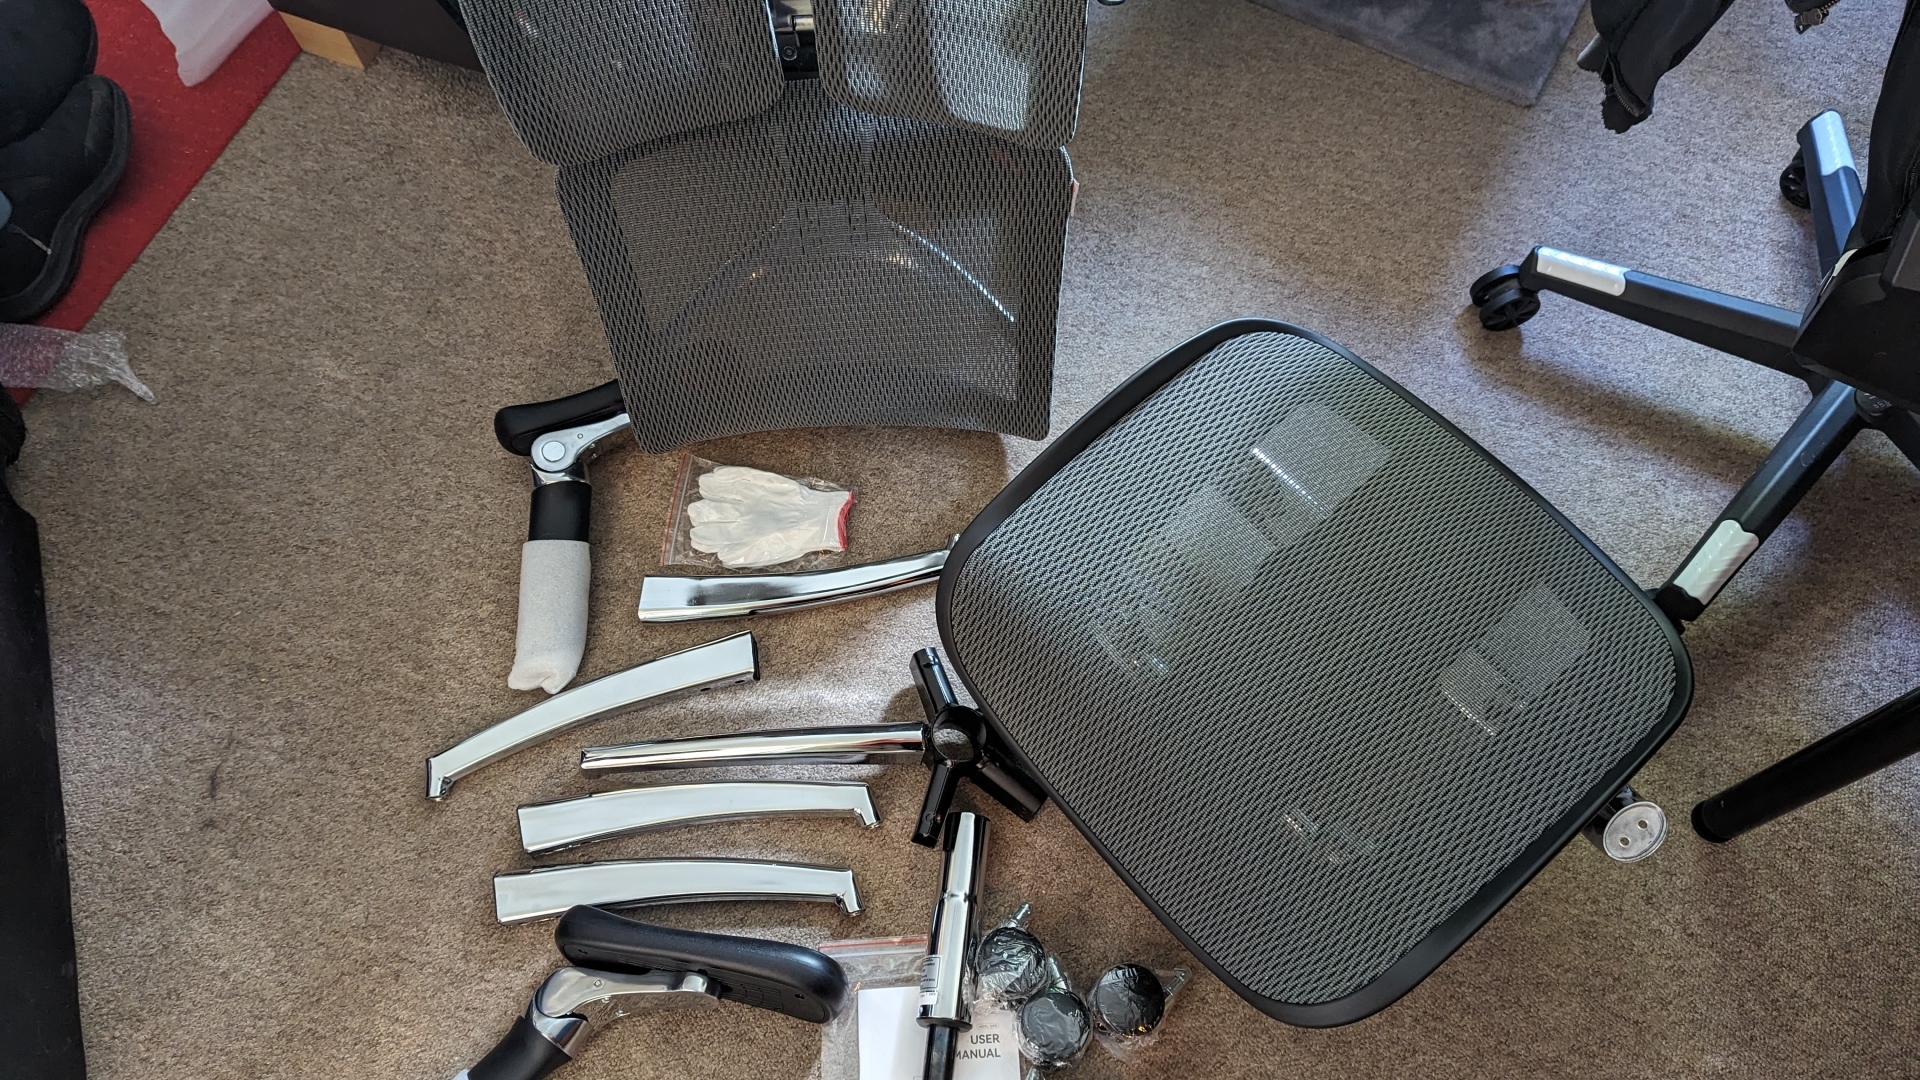 Sihoo S300 ergonomic office chair review image showing its parts mid-assembly.